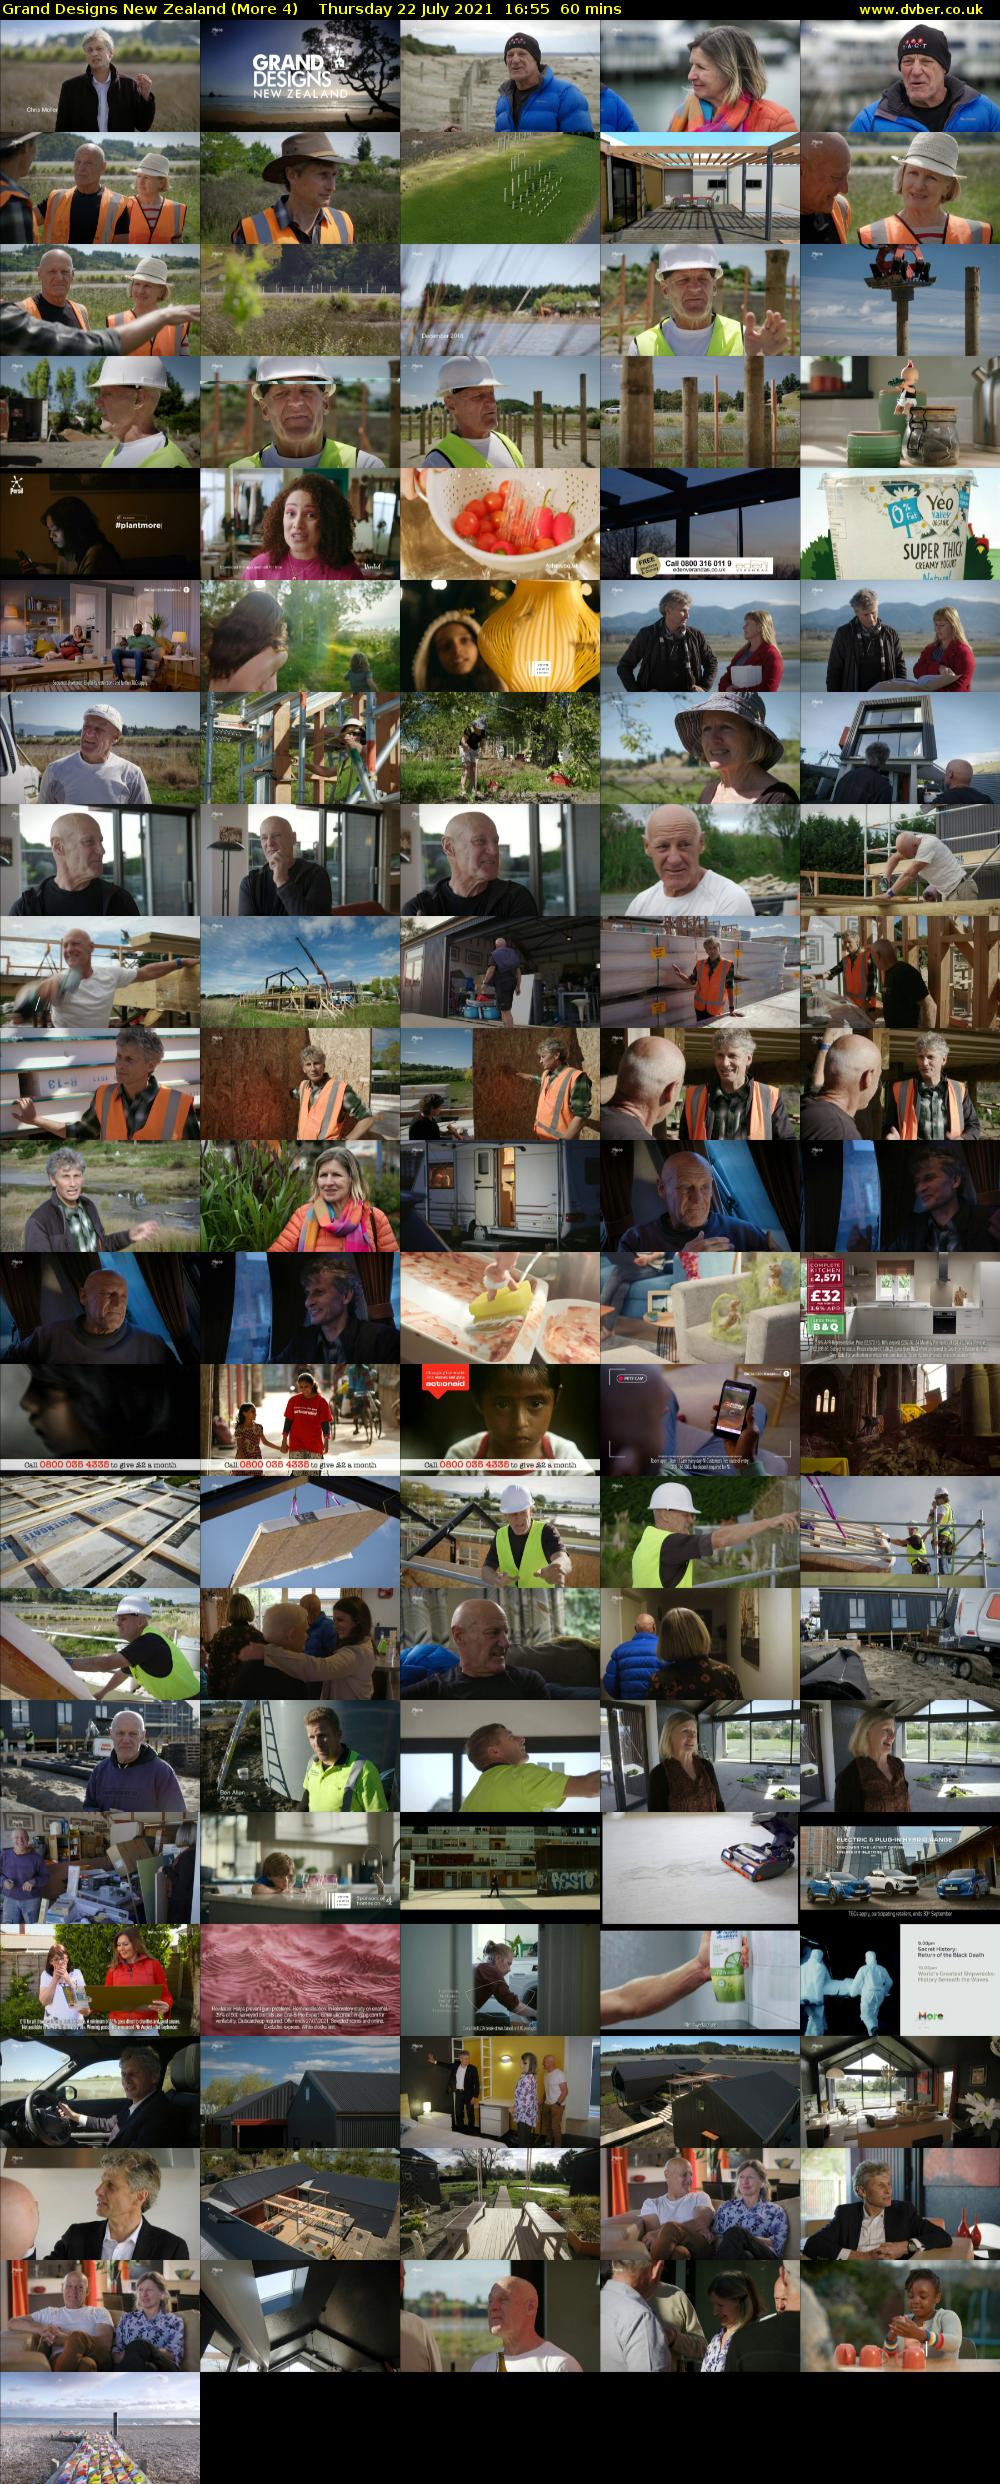 Grand Designs New Zealand (More 4) Thursday 22 July 2021 16:55 - 17:55